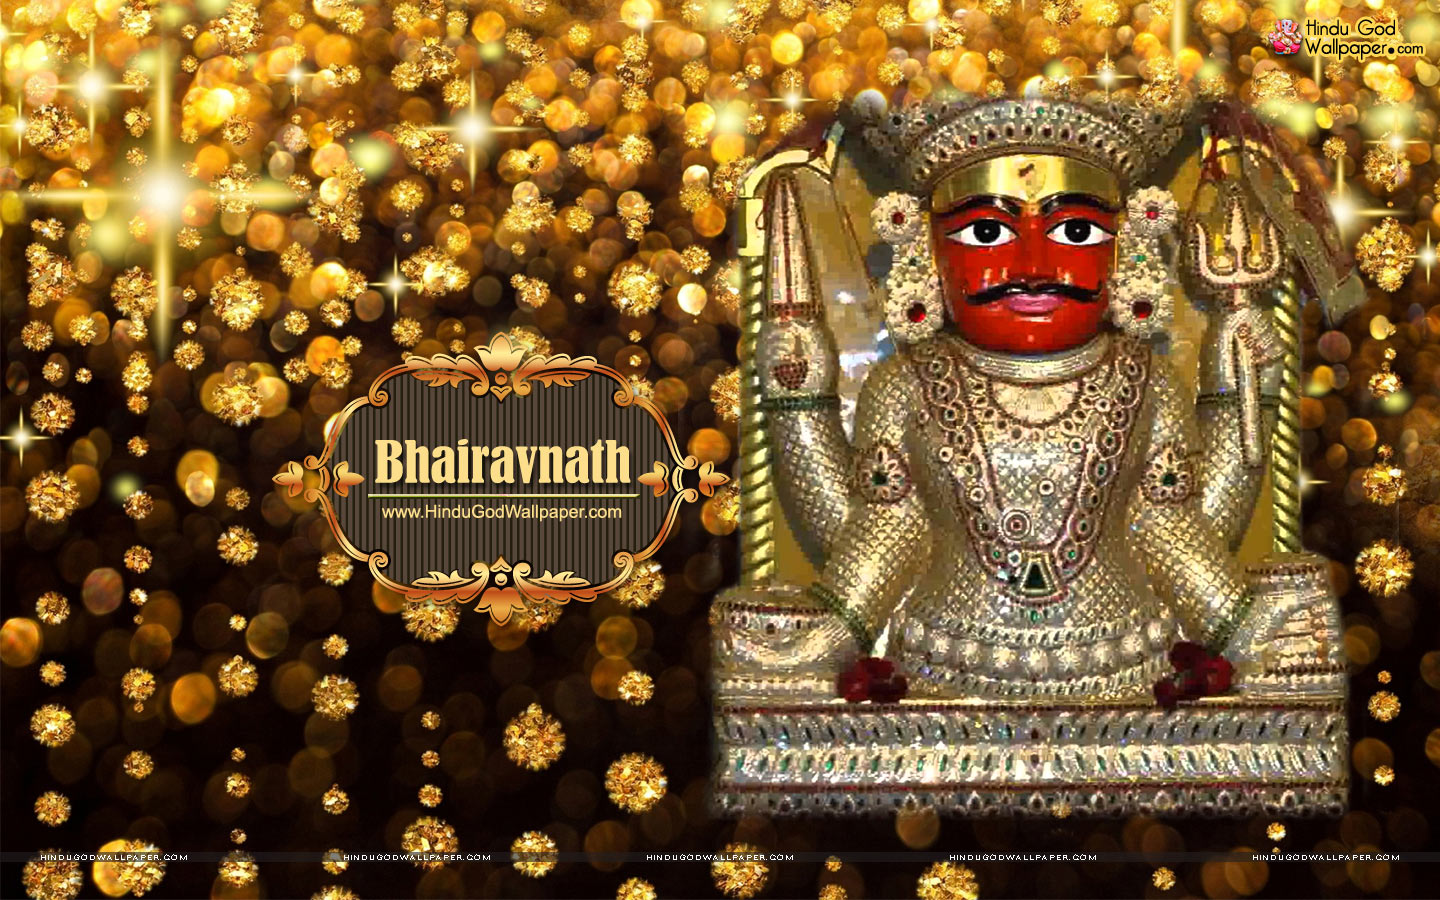 Bhairavnath Wallpapers, Images & Photos Free Download